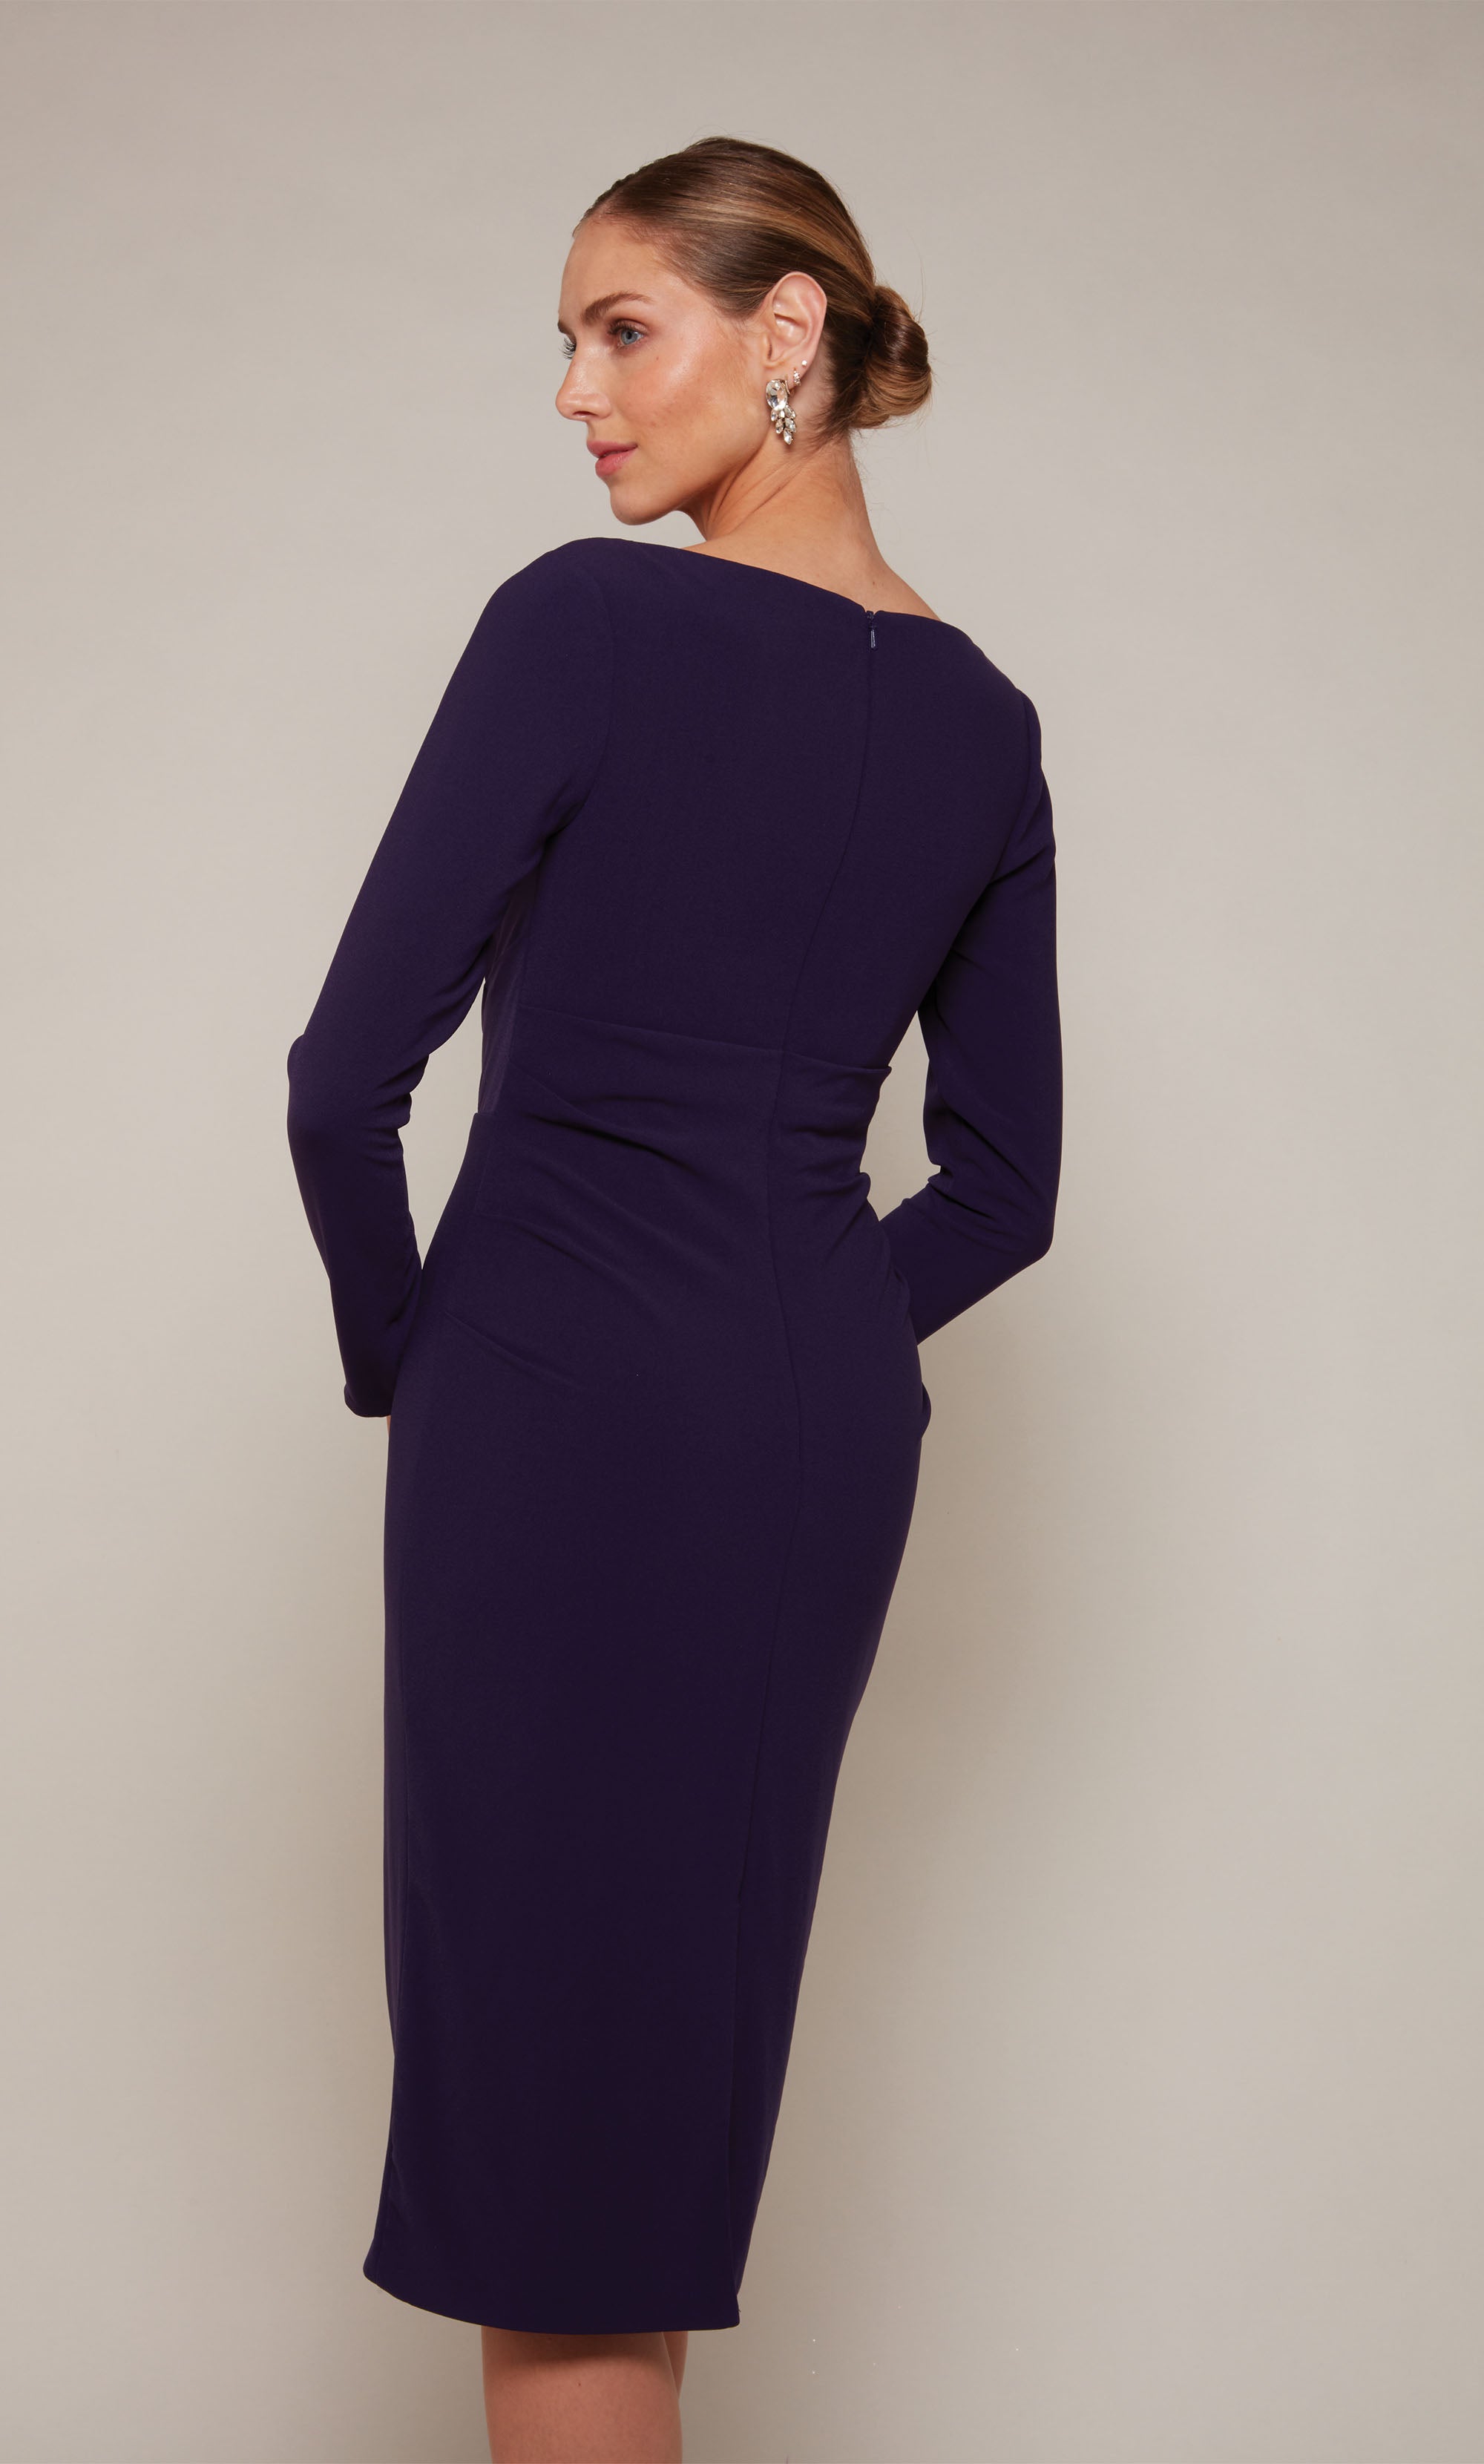 A knee length cocktail dress with long sleeves and an off center V-neckline in dark purple.